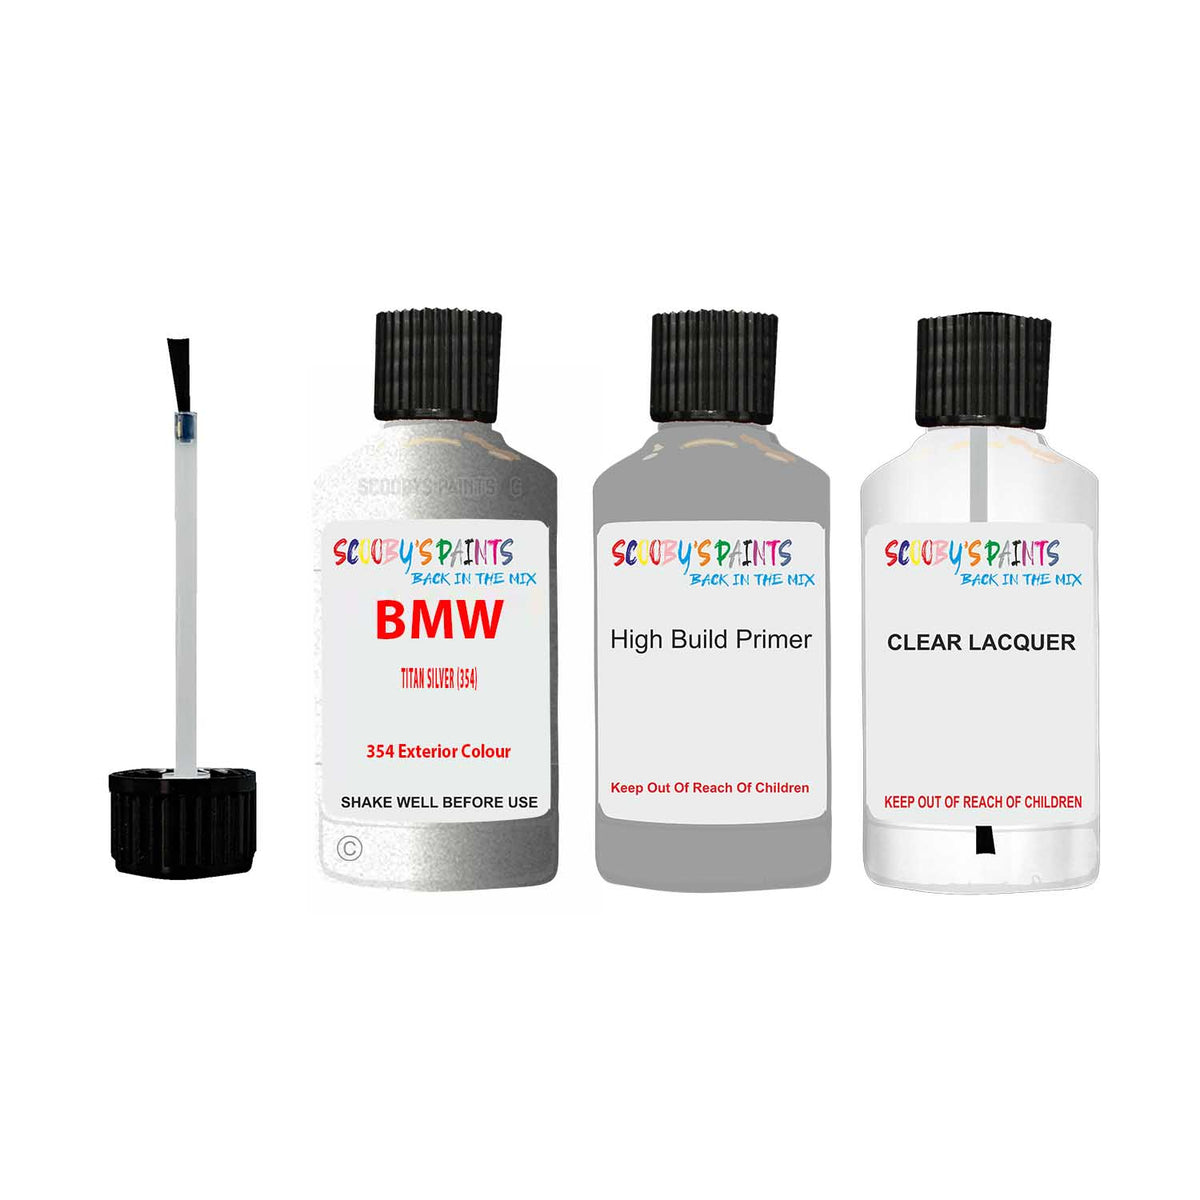 For BMW (354 Titan Silver Metallic) Touch Up or Spray Paint